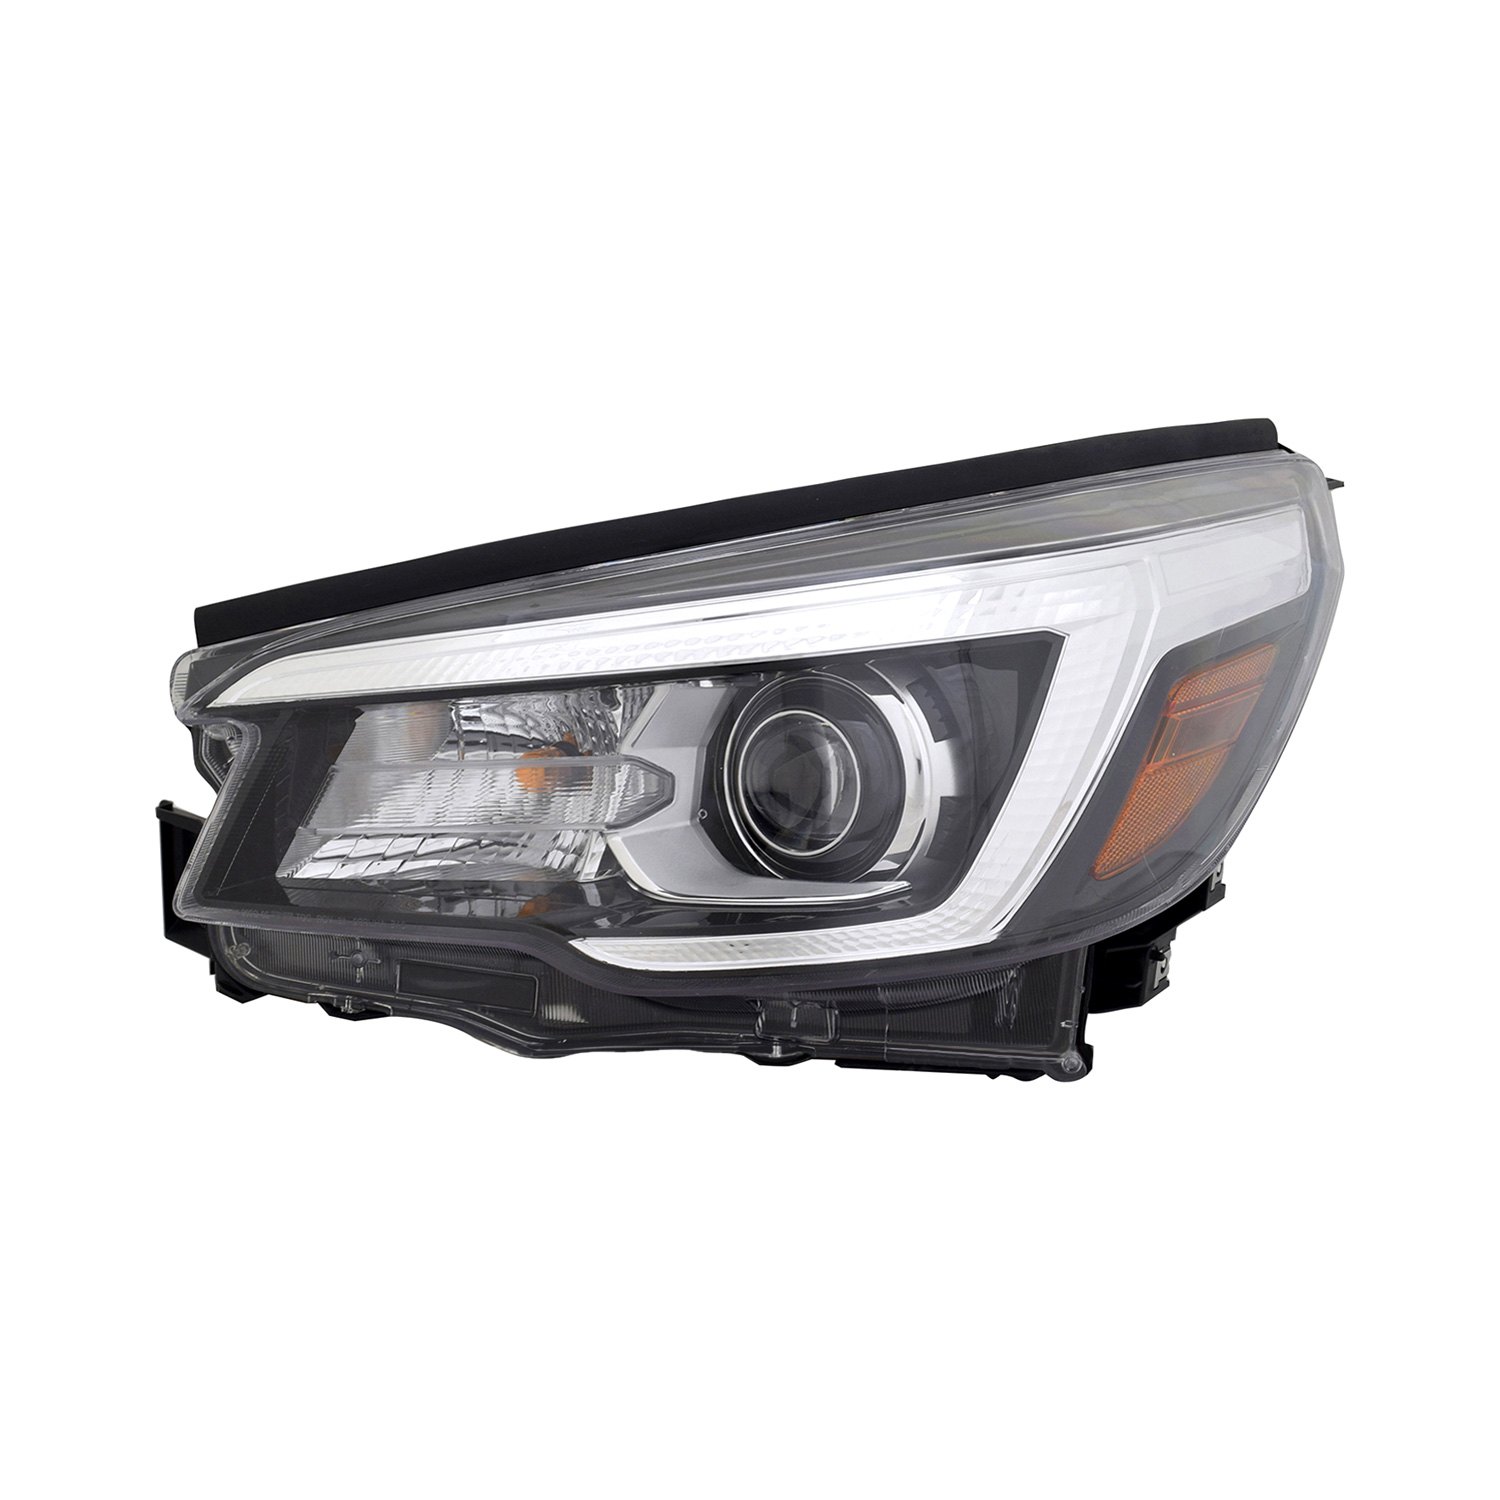 TYC 20-6784-00-1 Subaru Forester Left Replacement Head Lamp 